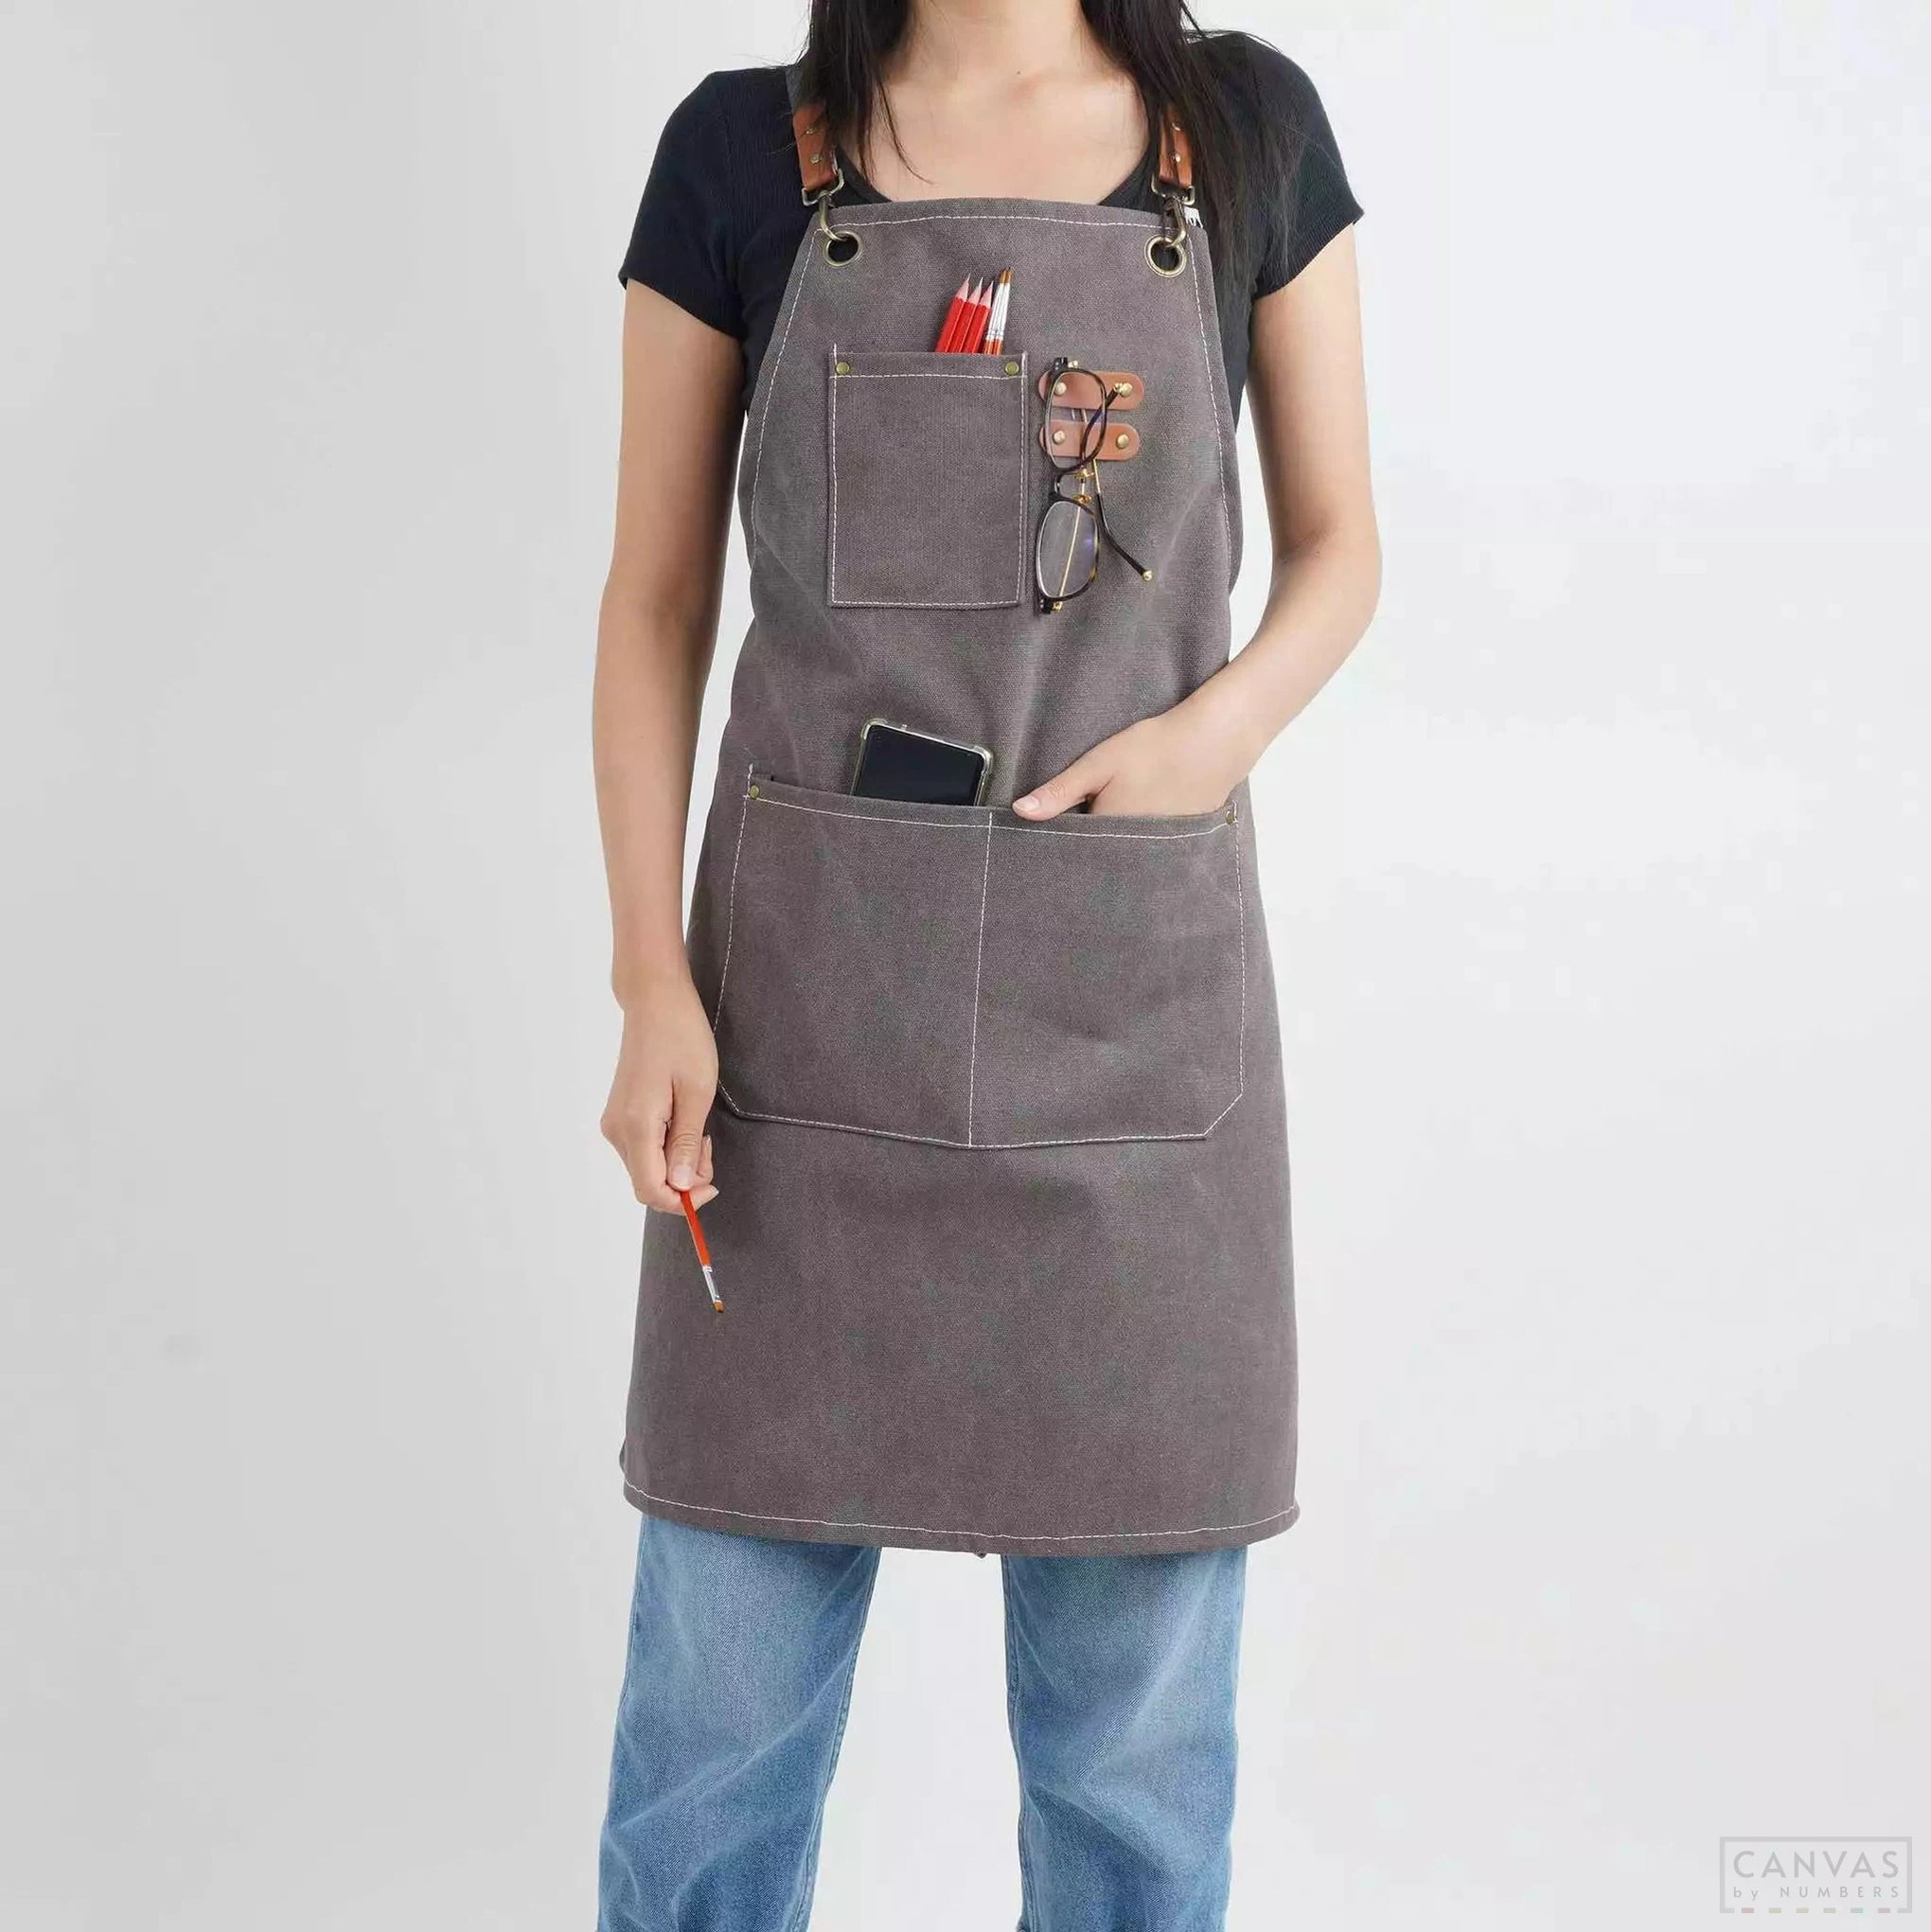 Adjustable Painting Apron Heavy Duty Canvas Artist Apron With